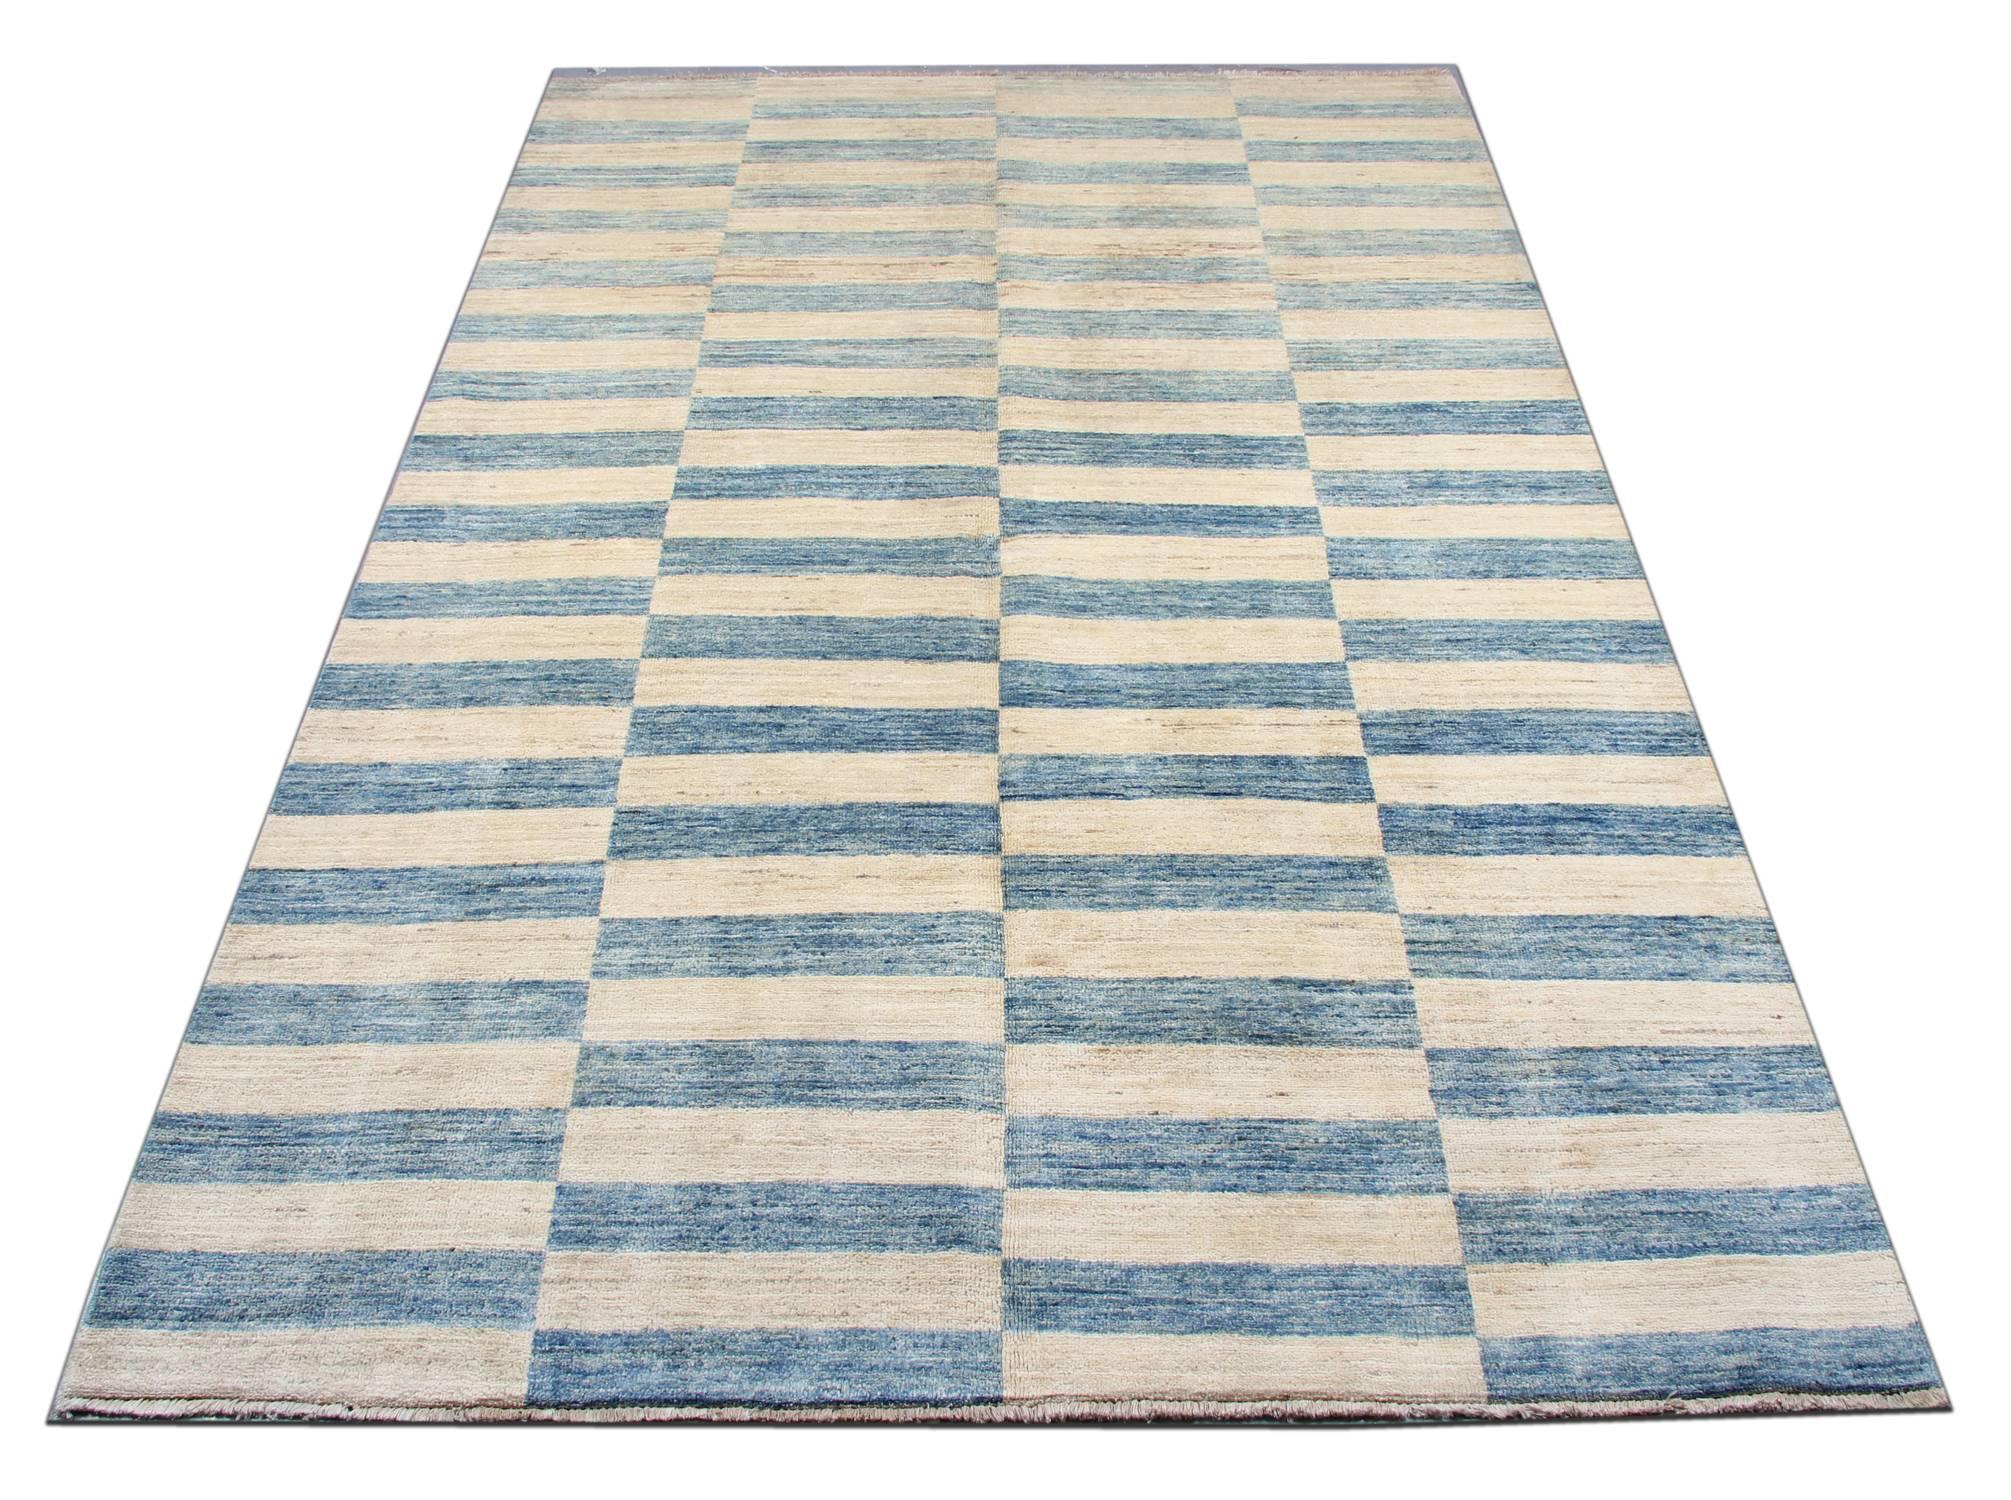 With nice blue and abstract element, this striped rug gives a subtle contemporary appearance. The geometric rug is featuring a beautiful sky palette of blue and ivory. This blue rug is grounded in stylish colors that will add a touch of modernized